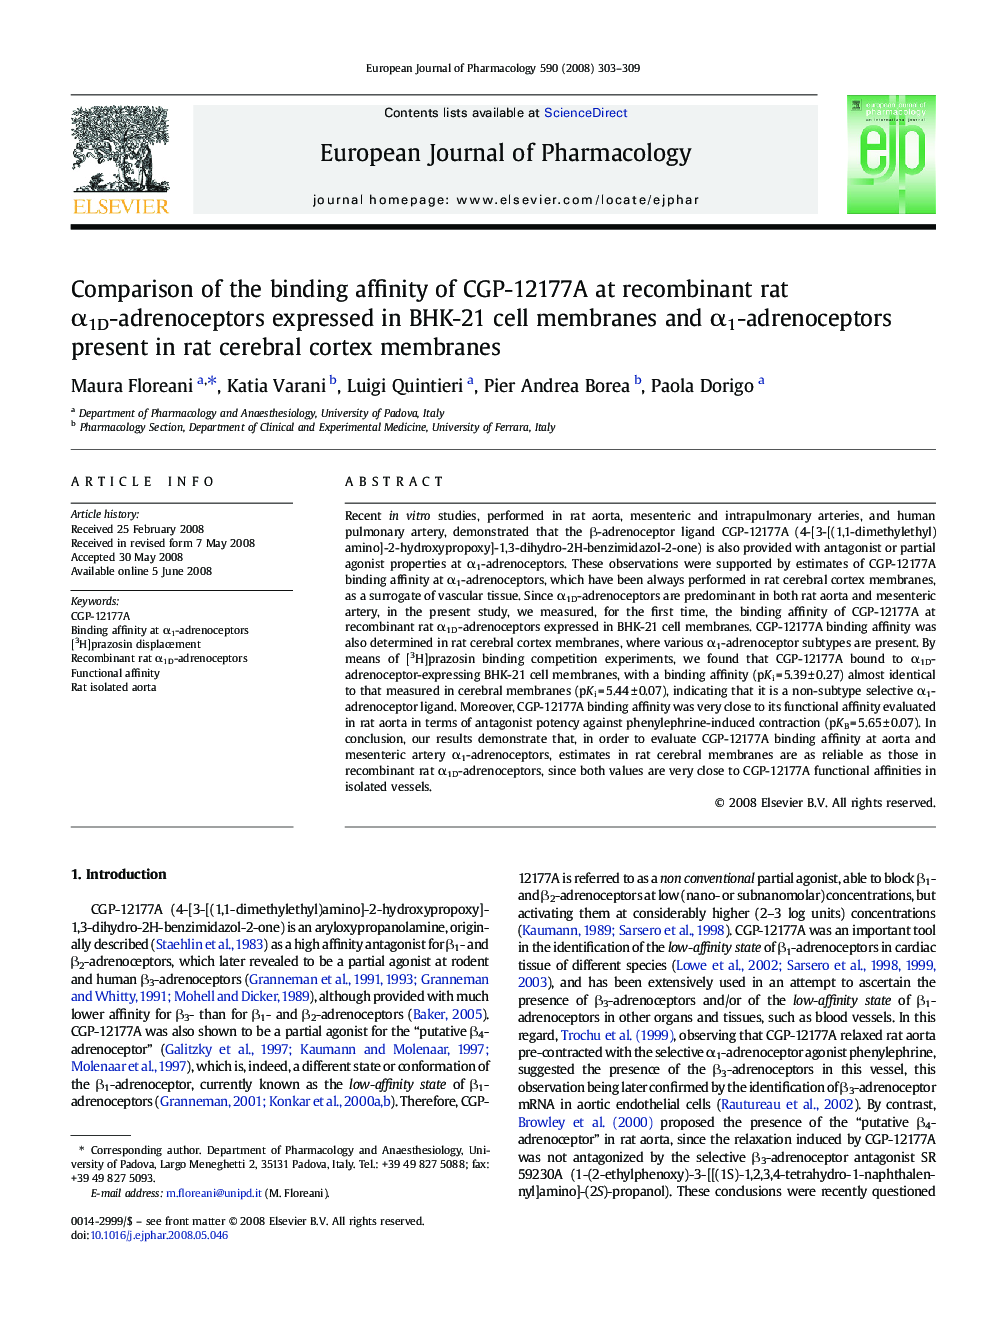 Comparison of the binding affinity of CGP-12177A at recombinant rat α1D-adrenoceptors expressed in BHK-21 cell membranes and α1-adrenoceptors present in rat cerebral cortex membranes